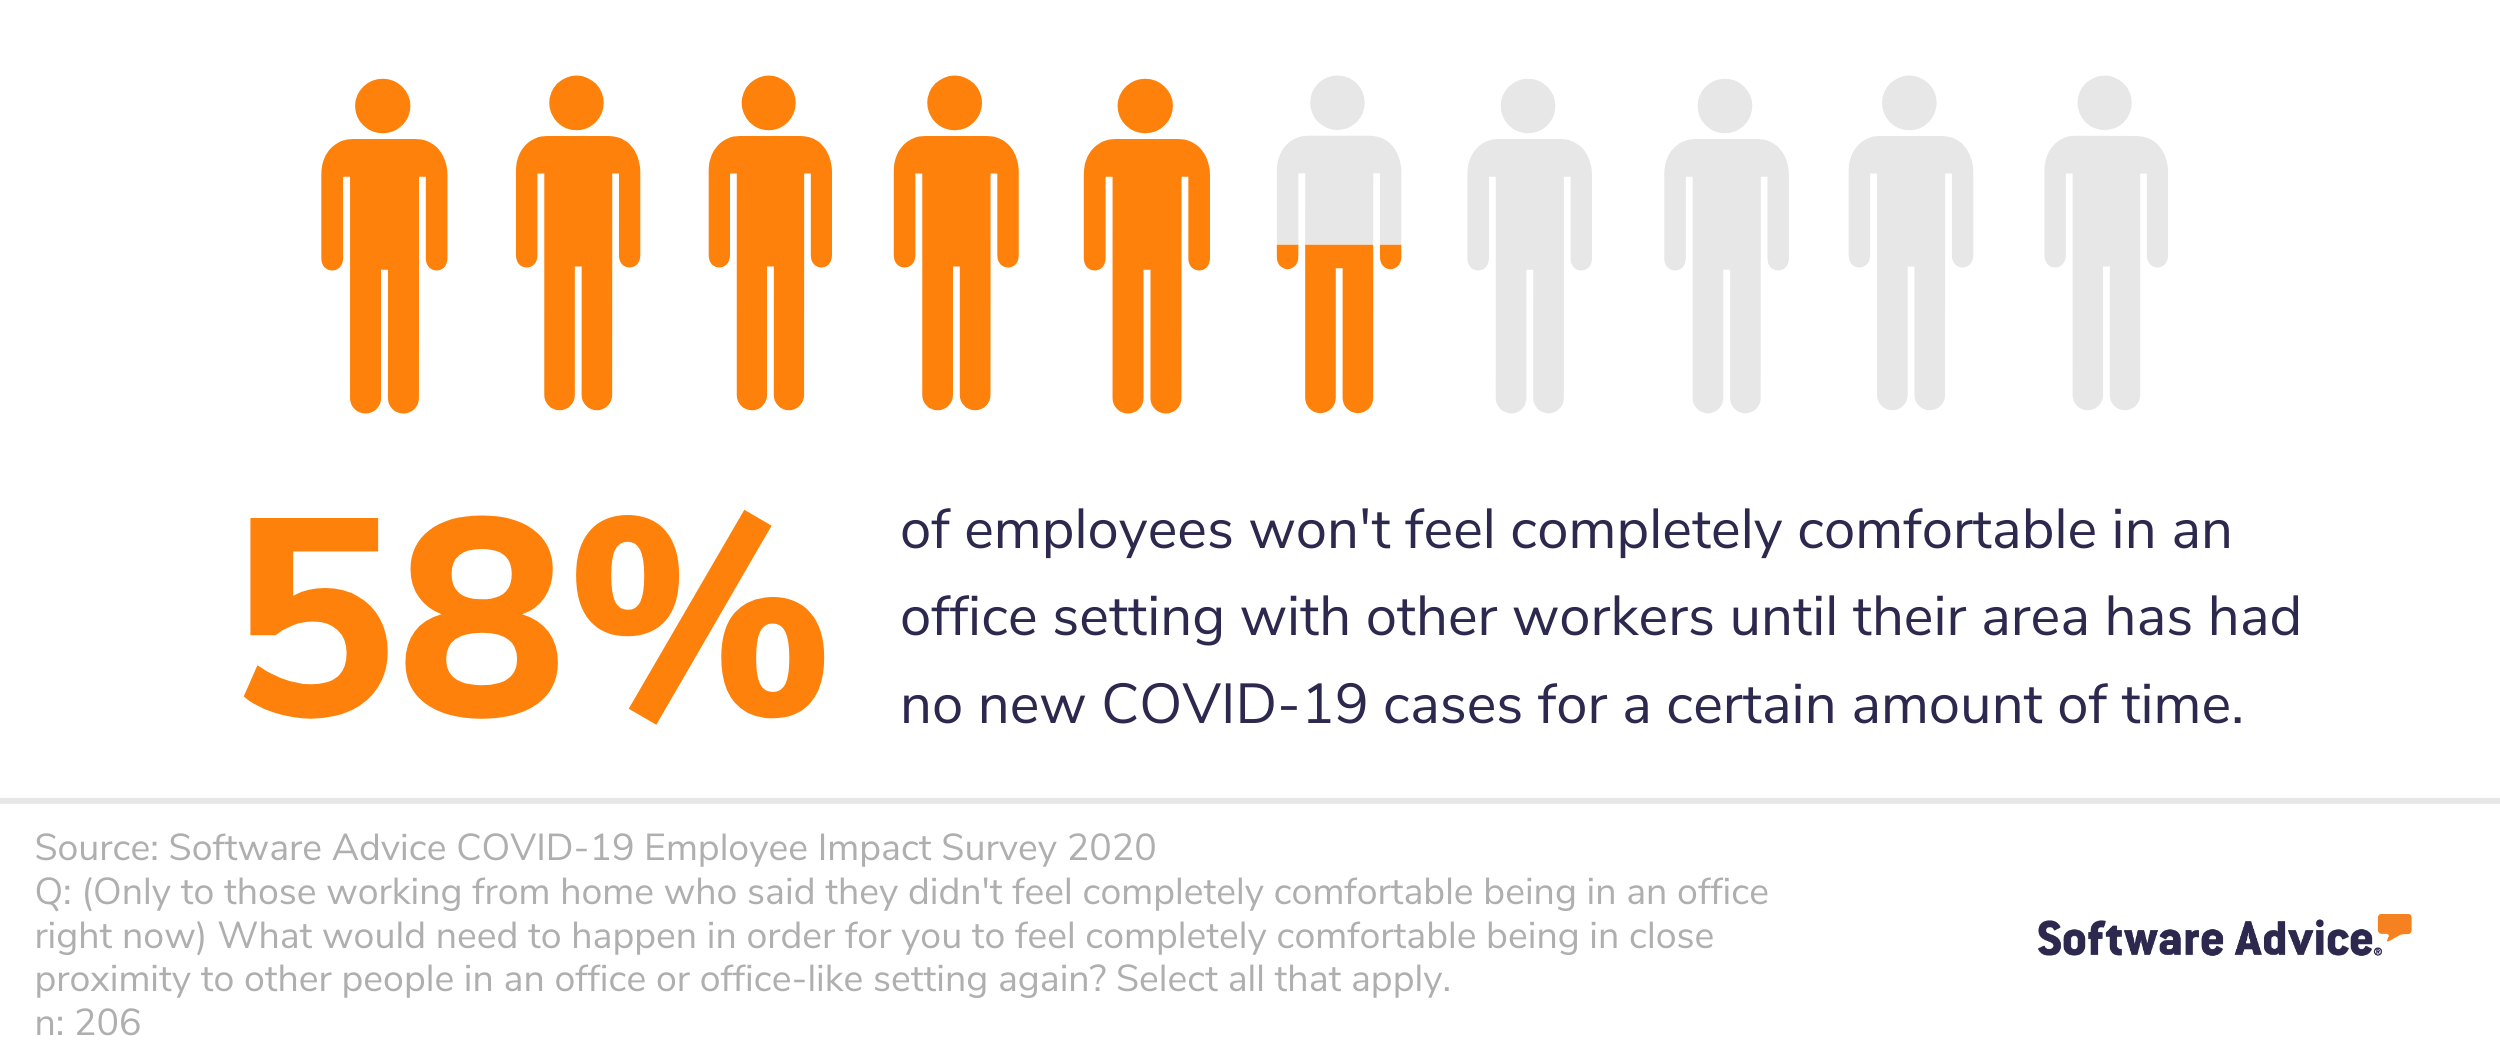 Chart-showing-58%-of-employees-won't-feel-comfortable-in-an-office-setting-until-their-area-has-had-no-new-COVID-19-cases-for-a-certain-amount-of-time.